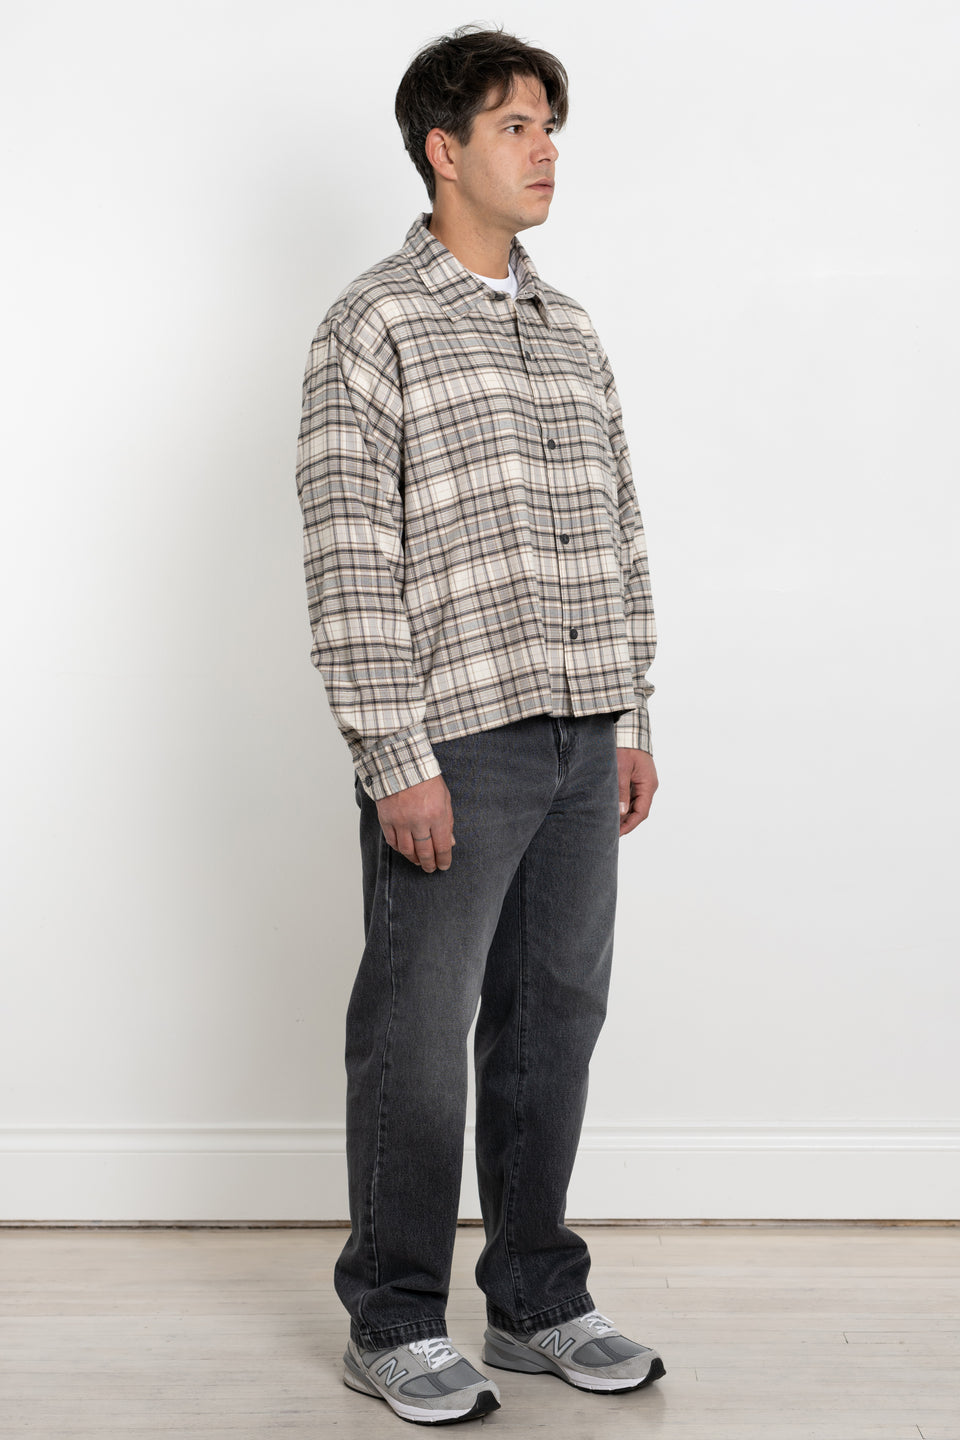 mfpen AW23 or FW23 Men's Collection Priority Shirt Oatmeal Check Organic Cotton Calculus Victoria BC Canada